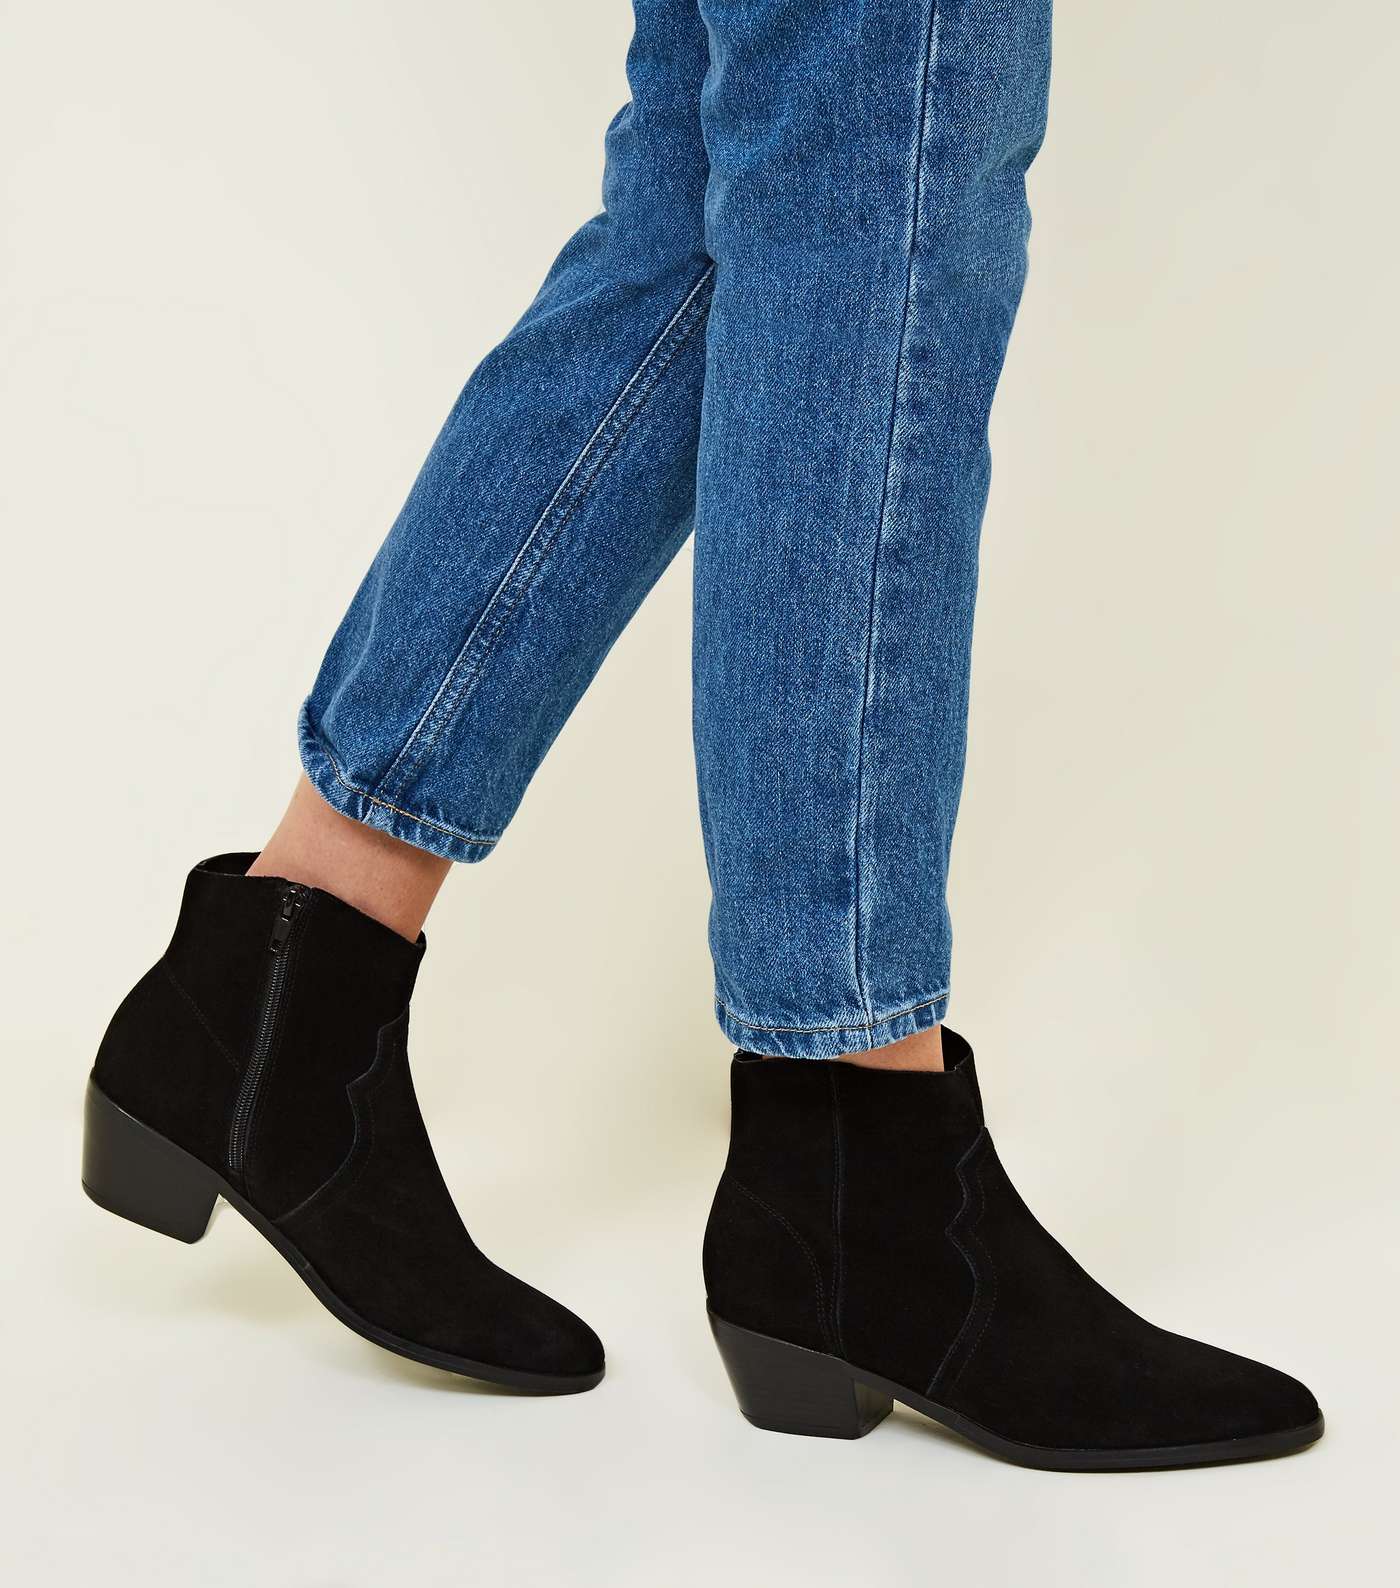 Black Suede Western Boots Image 2